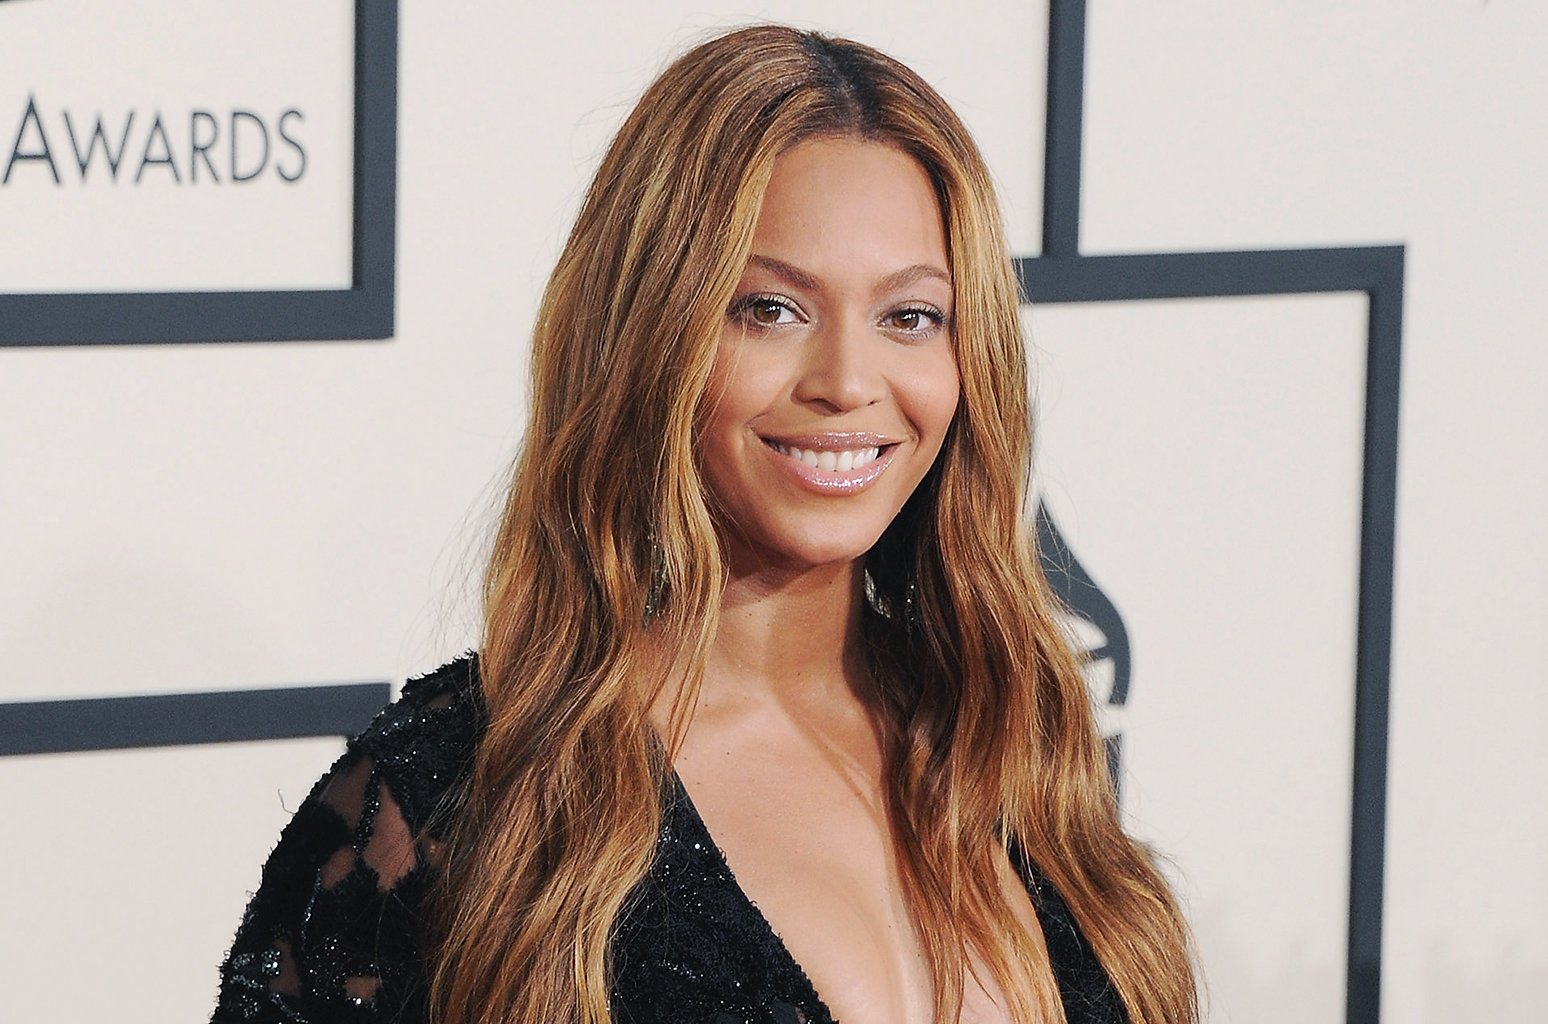 Beyonce, Taylor Swift and George Clooney are just some of the stars who hav...